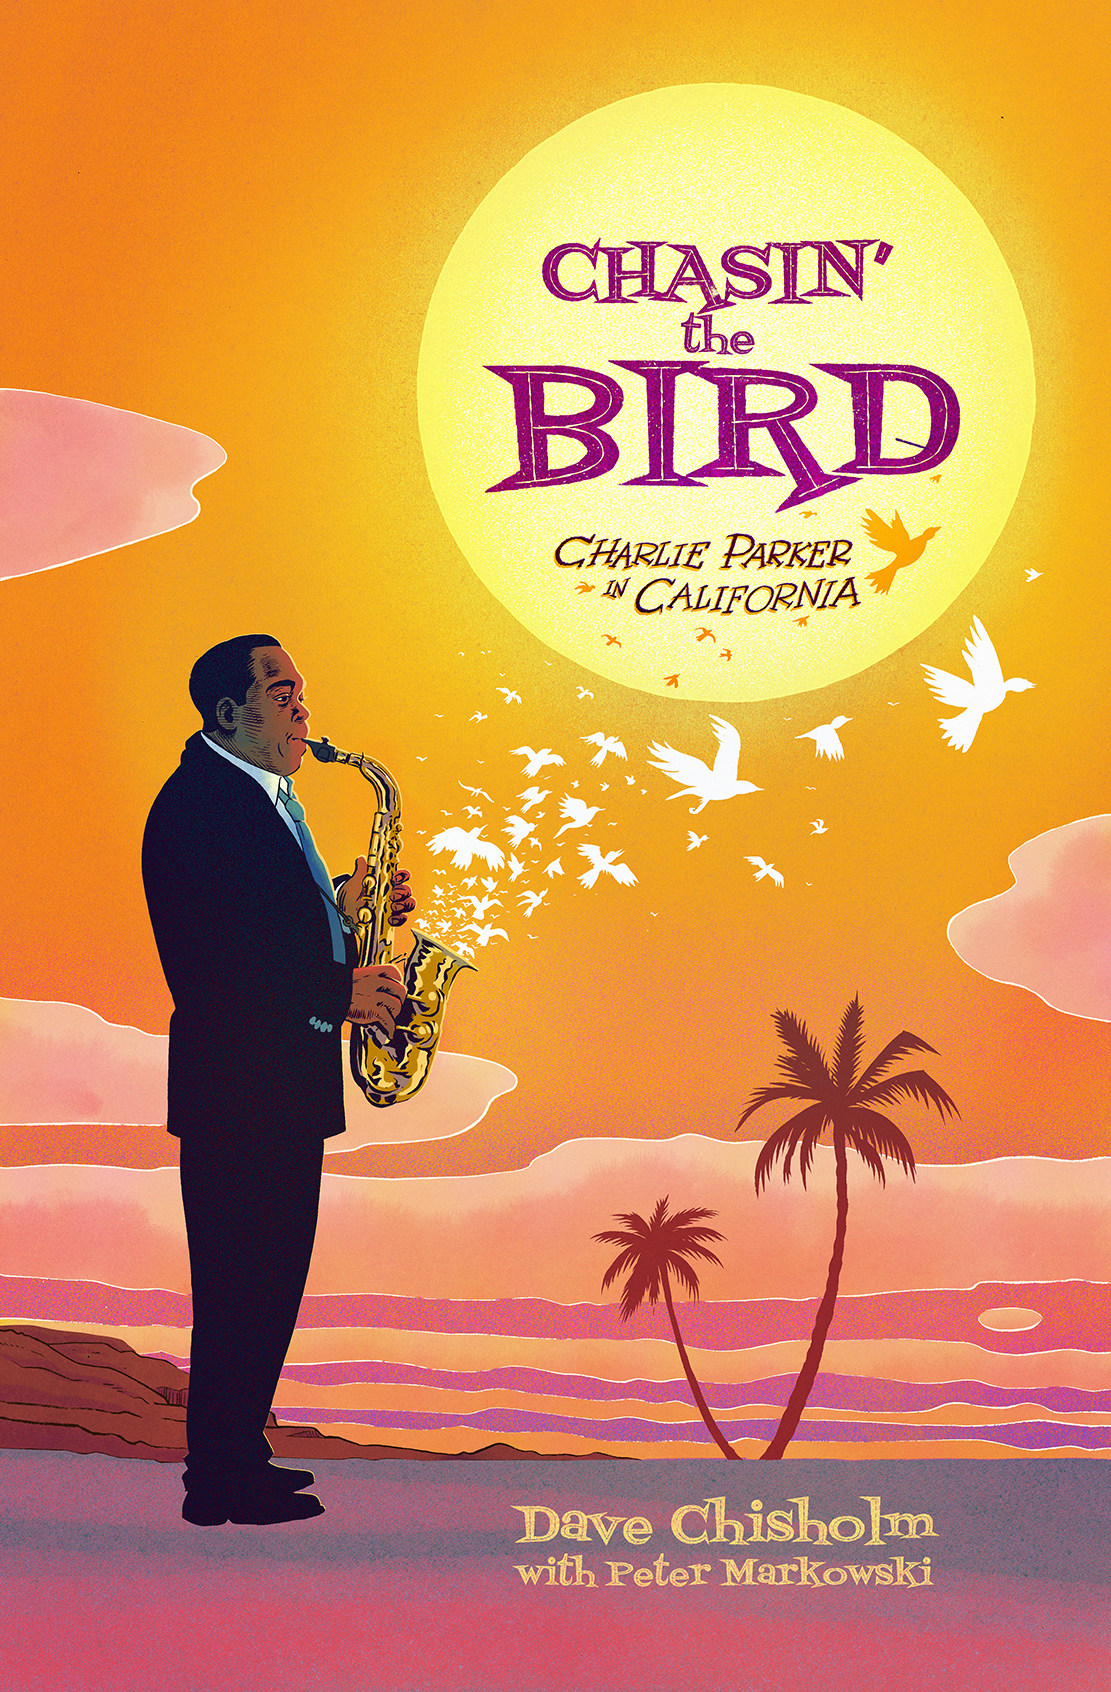 Z2 Comics Plans First-Ever Graphic Bio of Charlie Parker